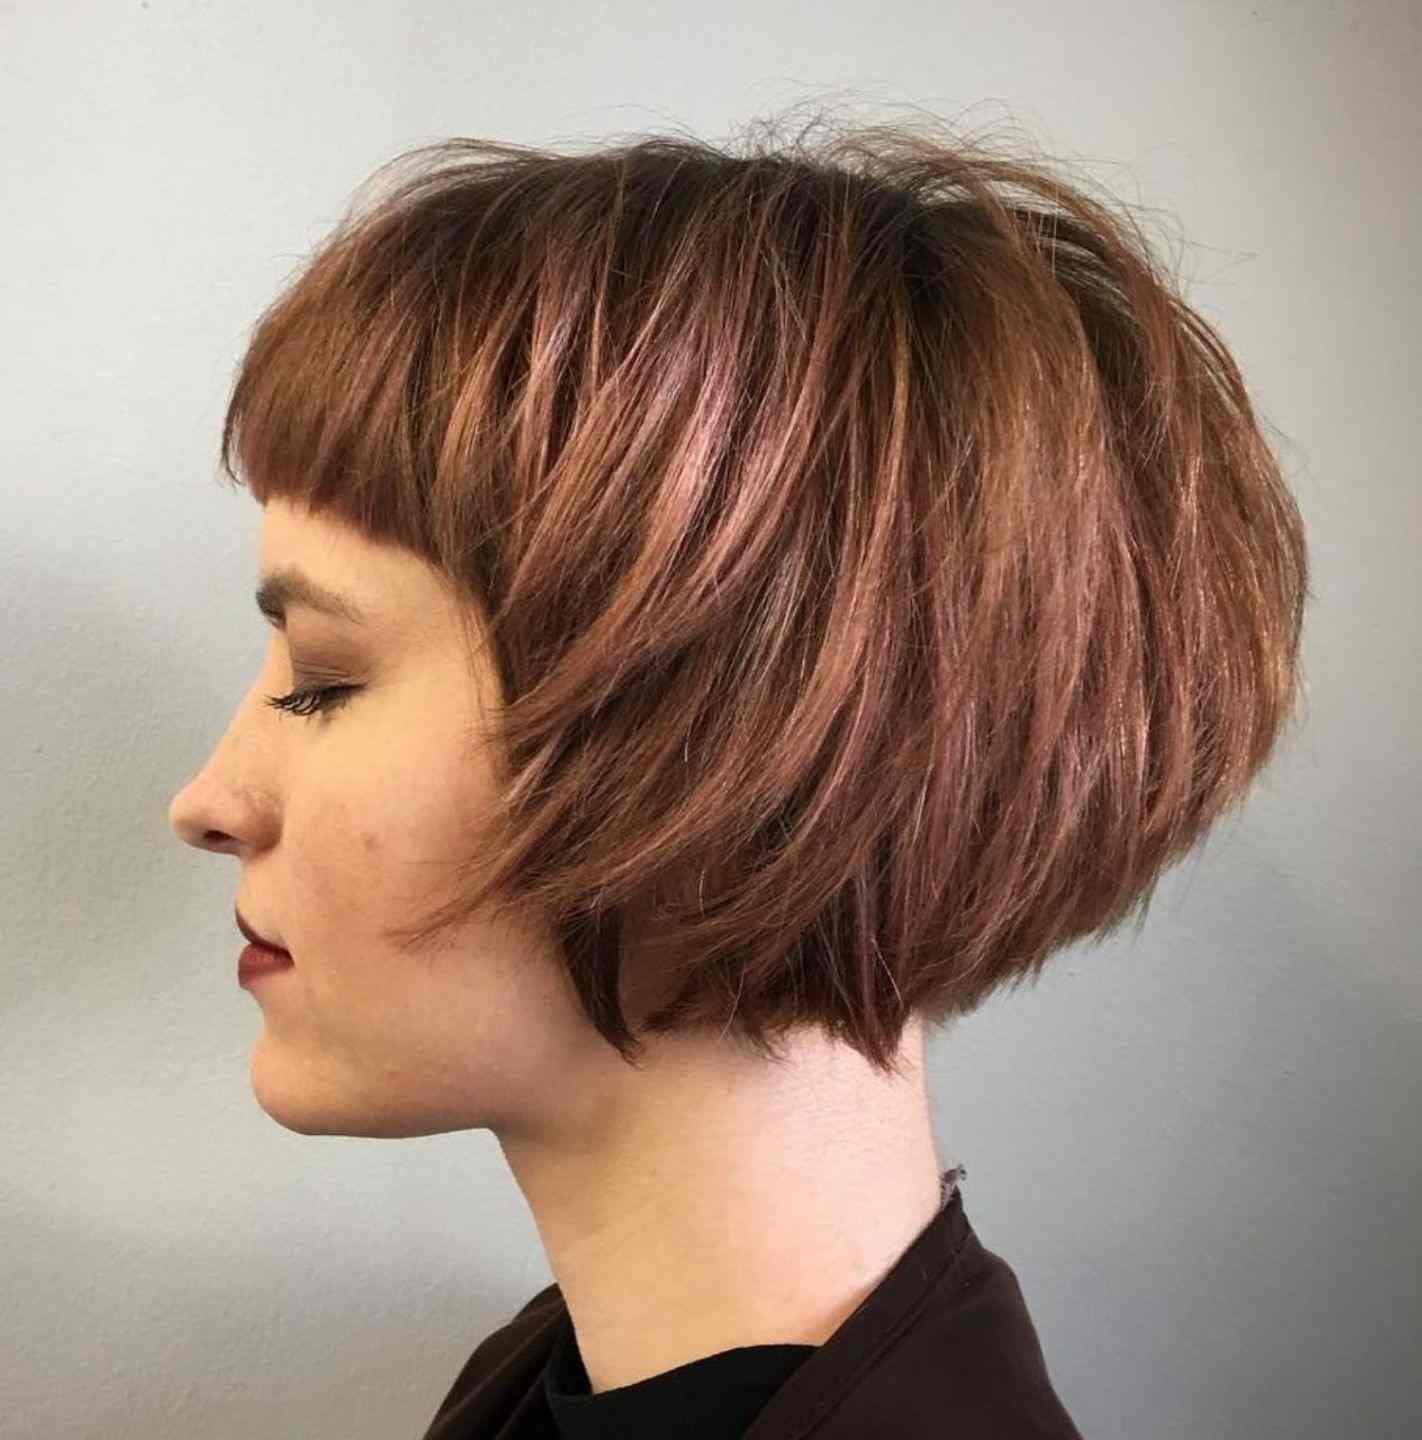 Short Bob with Baby Pony Hair Trends Hairstyles chestnut hair color